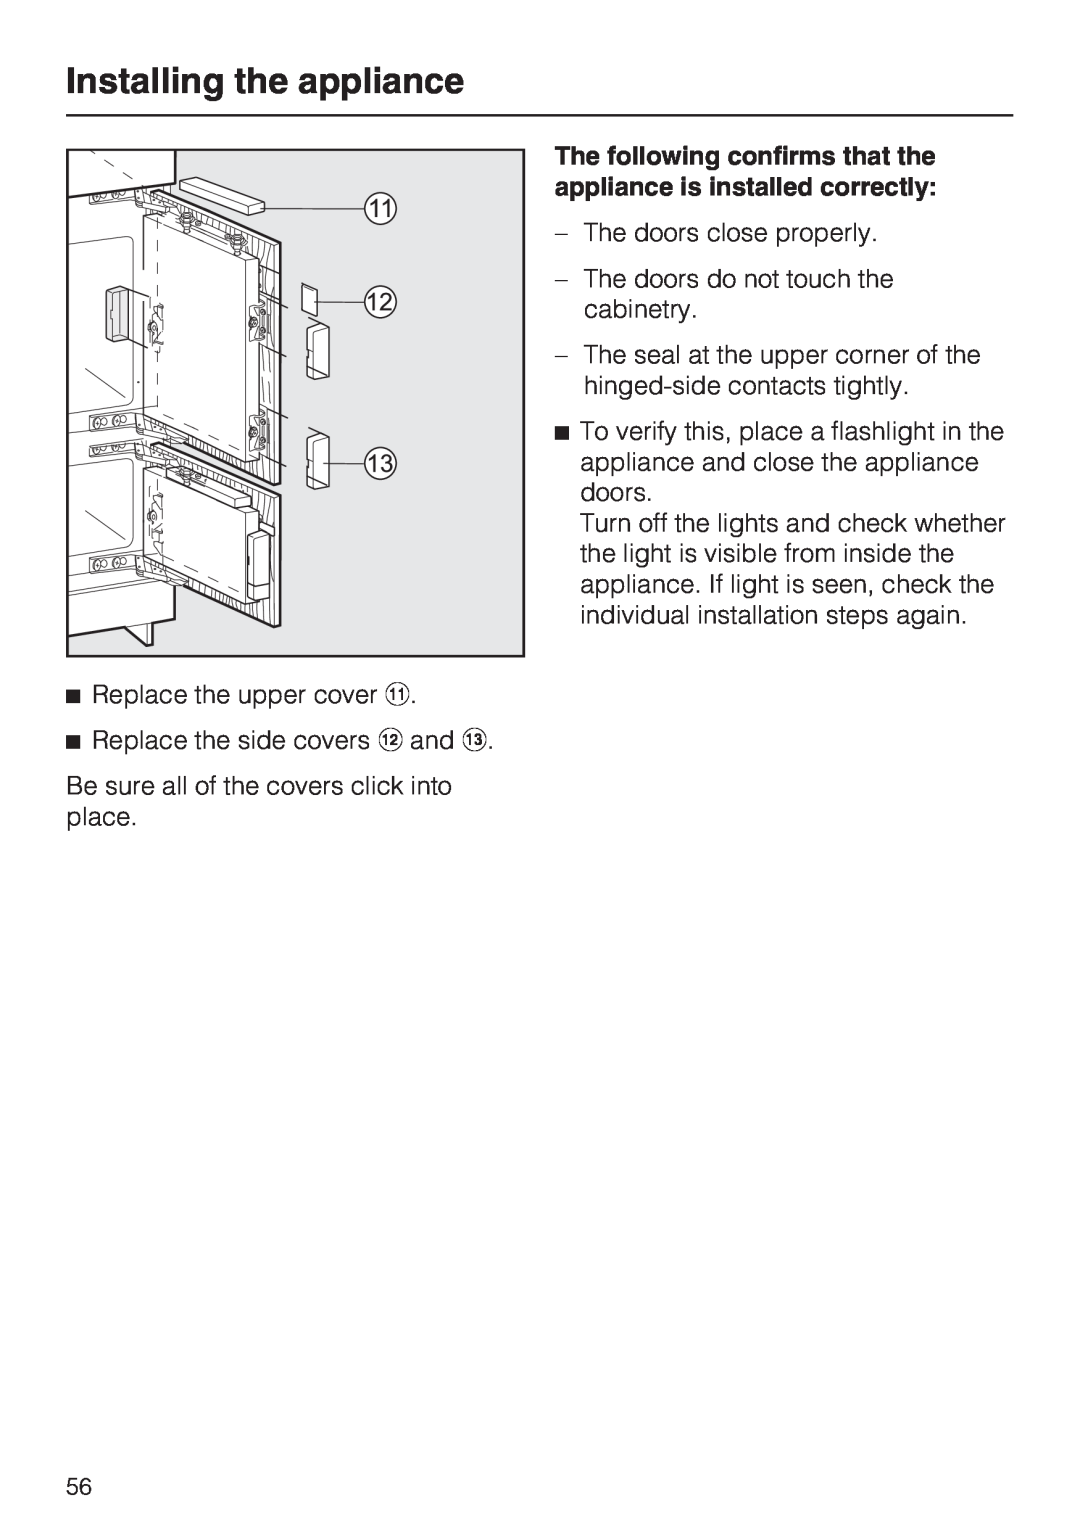 Miele KFN 9755 IDE installation instructions Installing the appliance, The doors close properly 